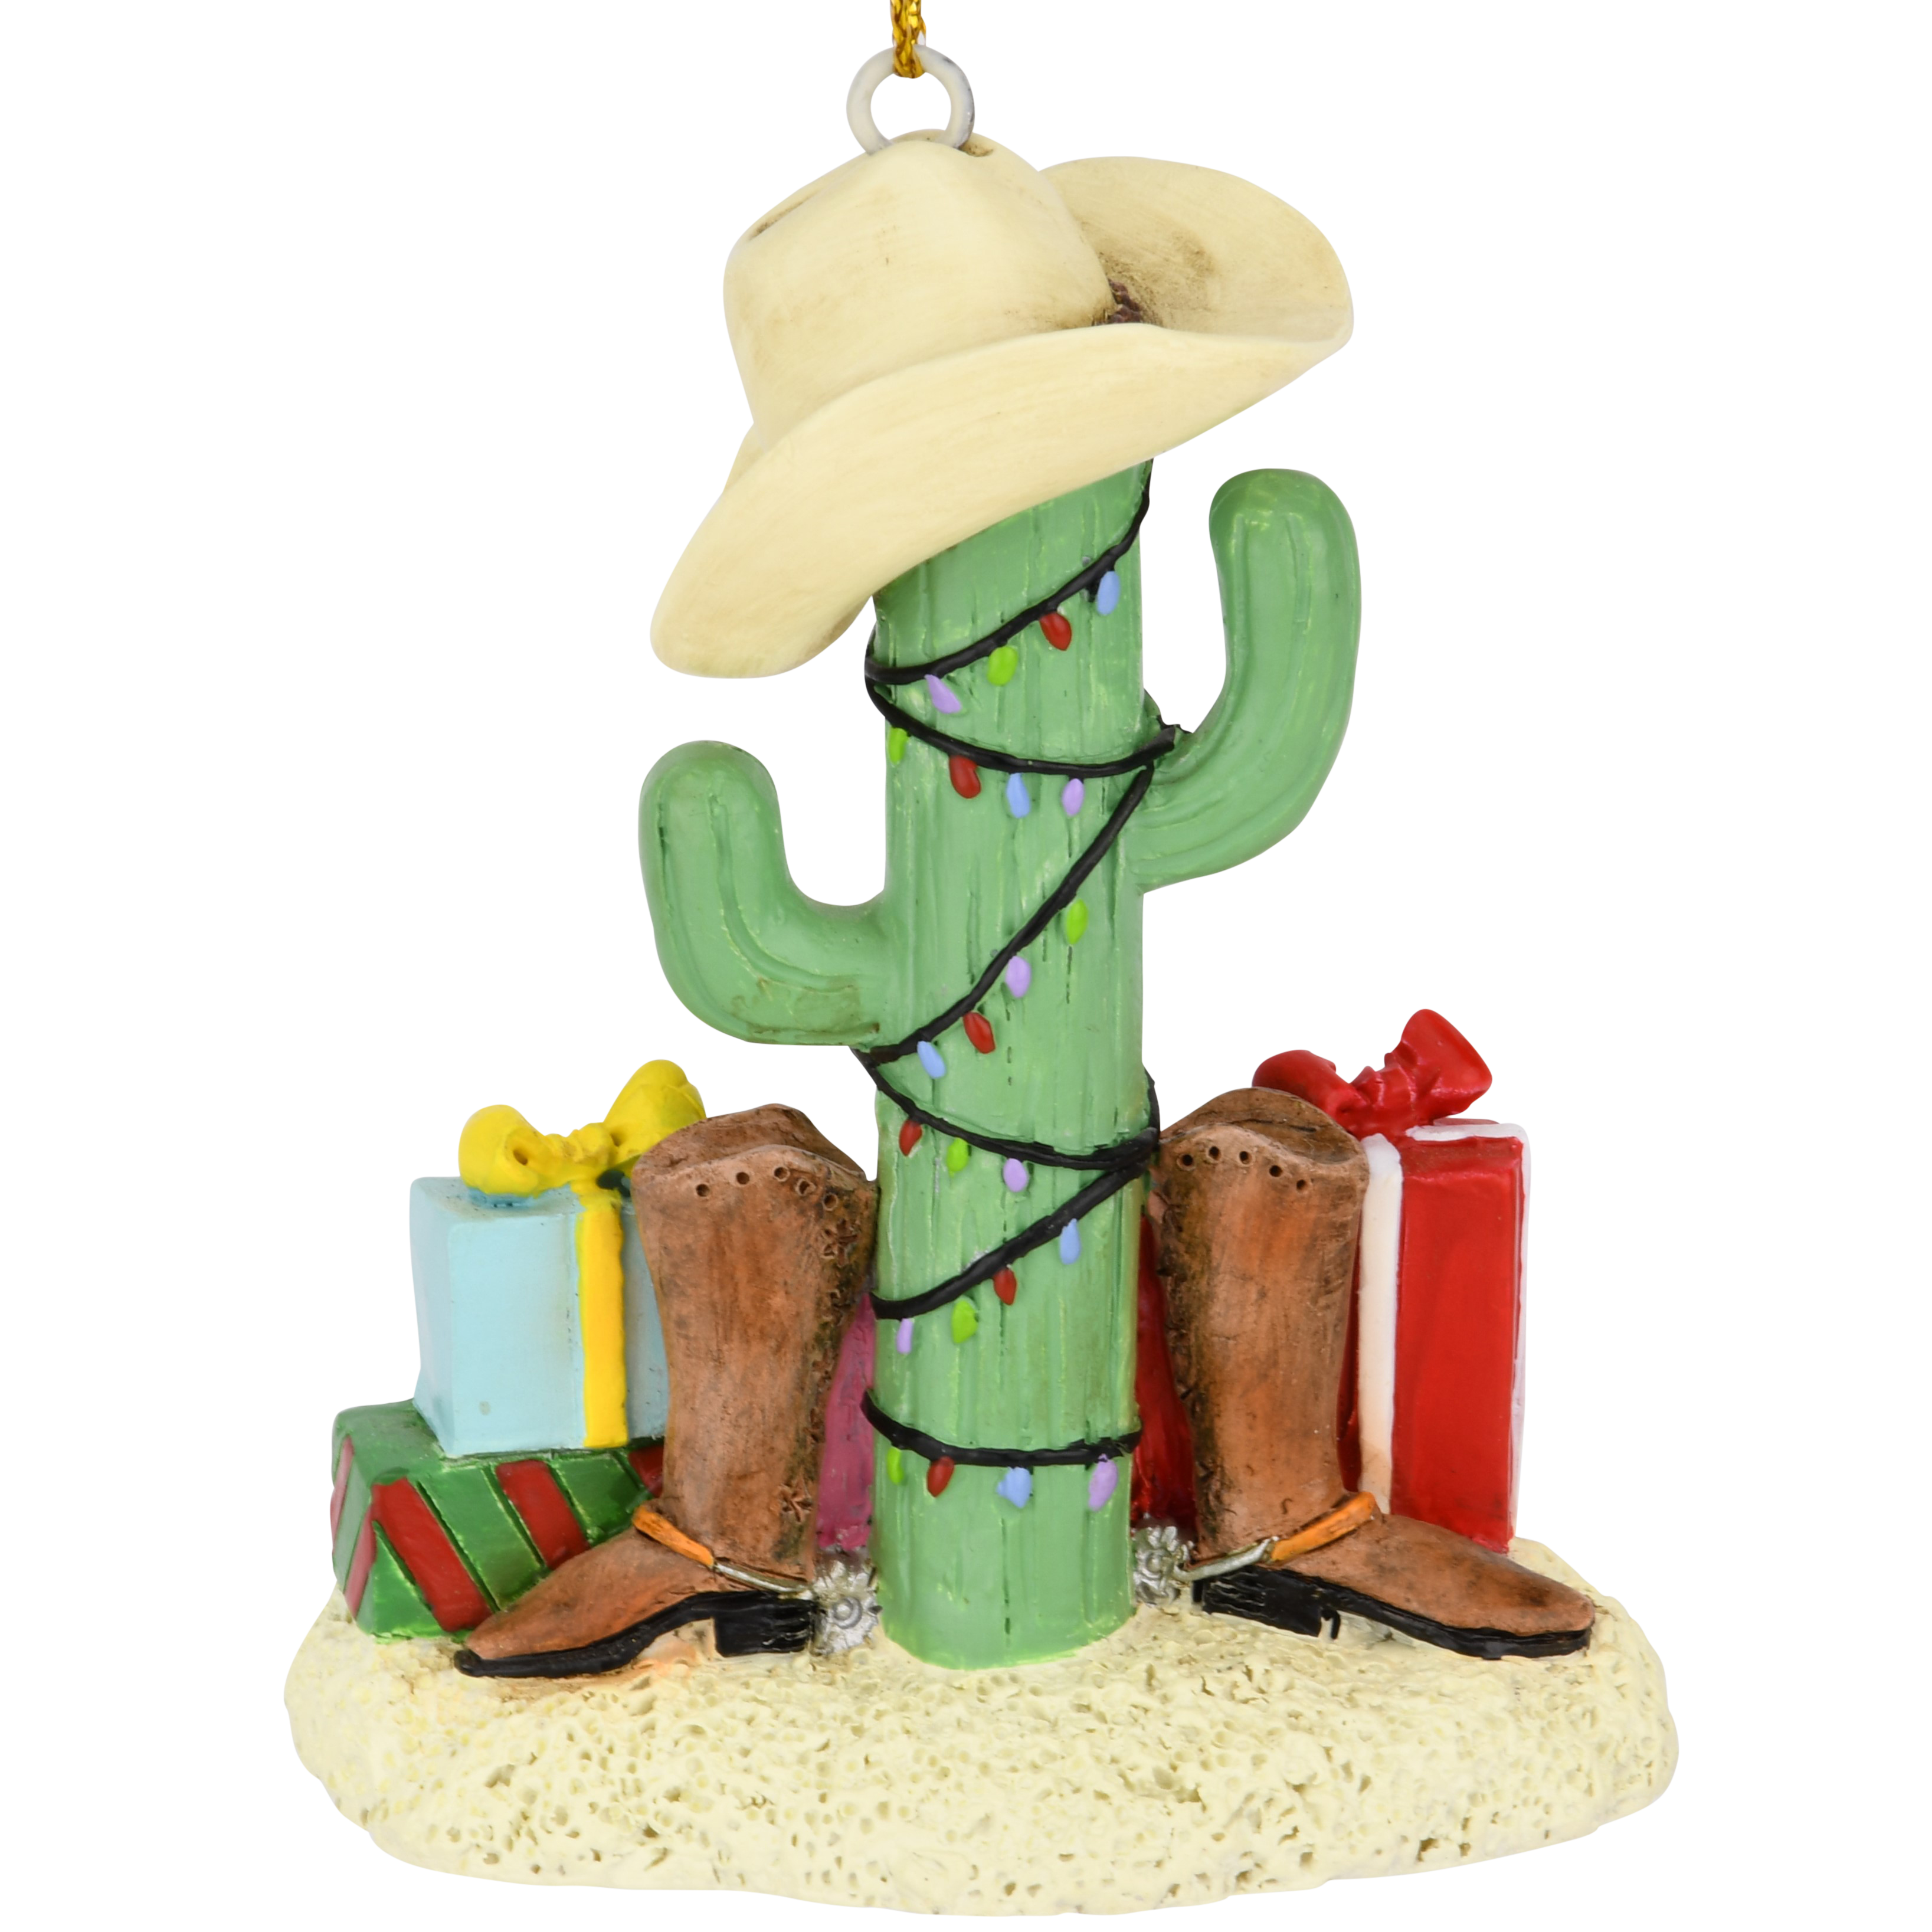 Cactus Christmas Tree with Cowboy Boots Cowboy Hats and Presents Ornament